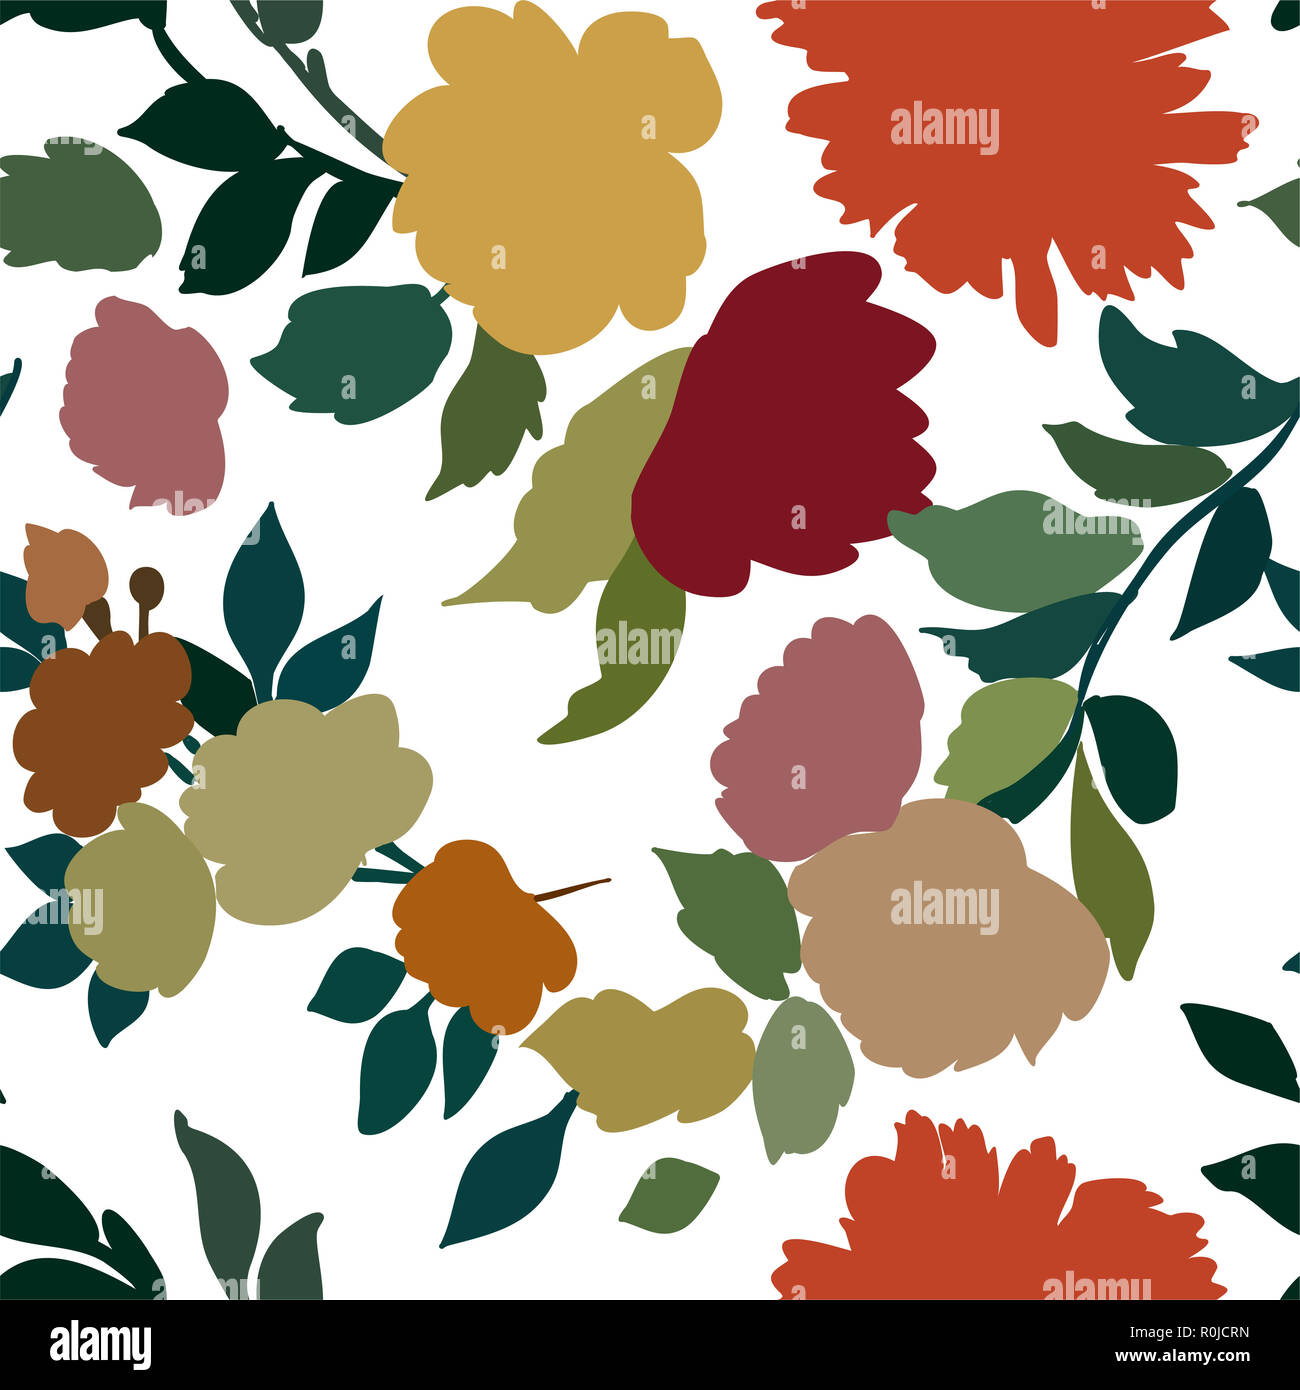 Silhouettes of different flowers and leaves hand drawn.Vector floral seamless background pattern for wallpaper, textile prints, fabric. Stock Photo